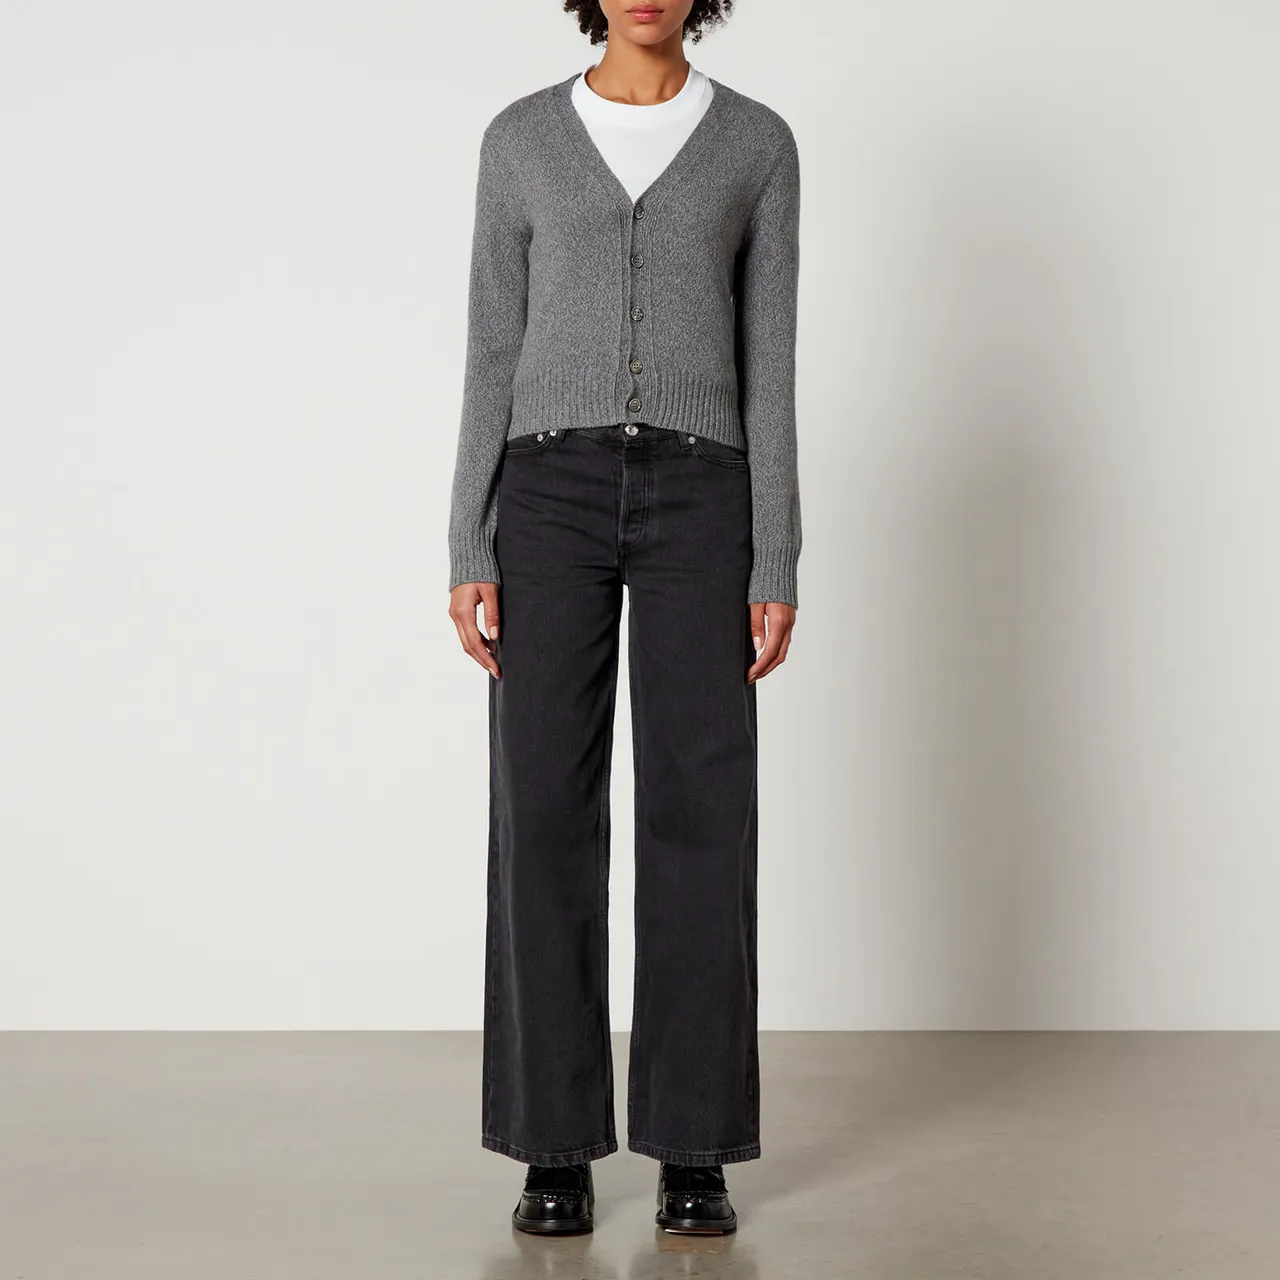 AMI de Coeur Cashmere and Wool-Blend Cardigan